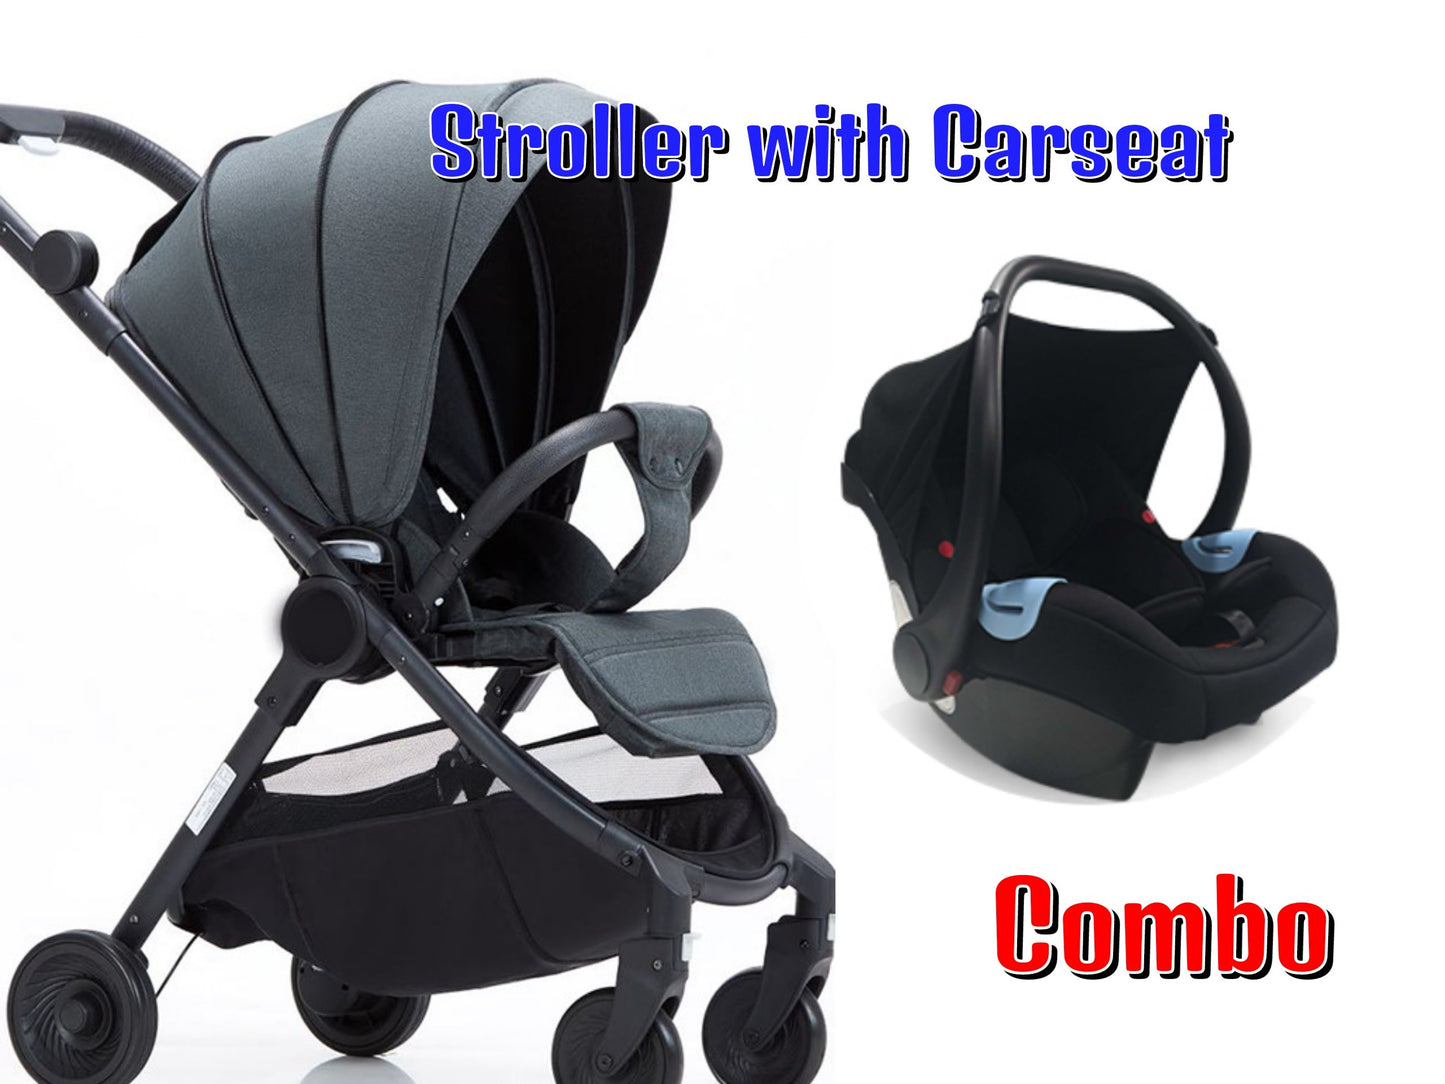 Baby Jogger City Tour Lightweight Stroller & Carseat - Travel 3 in 1